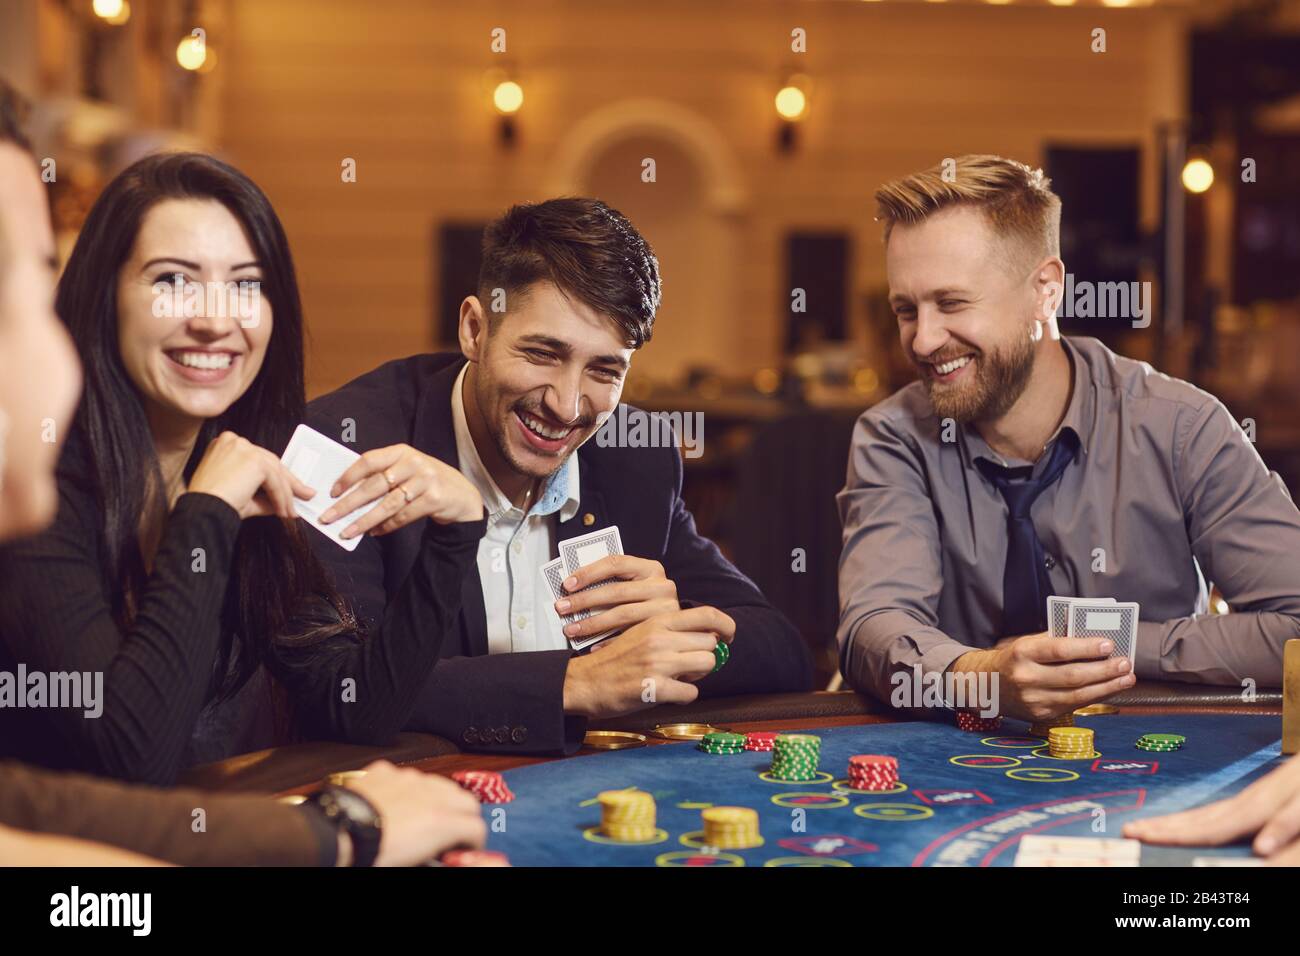 A group of wealthy young people gamble at a casino. Stock Photo